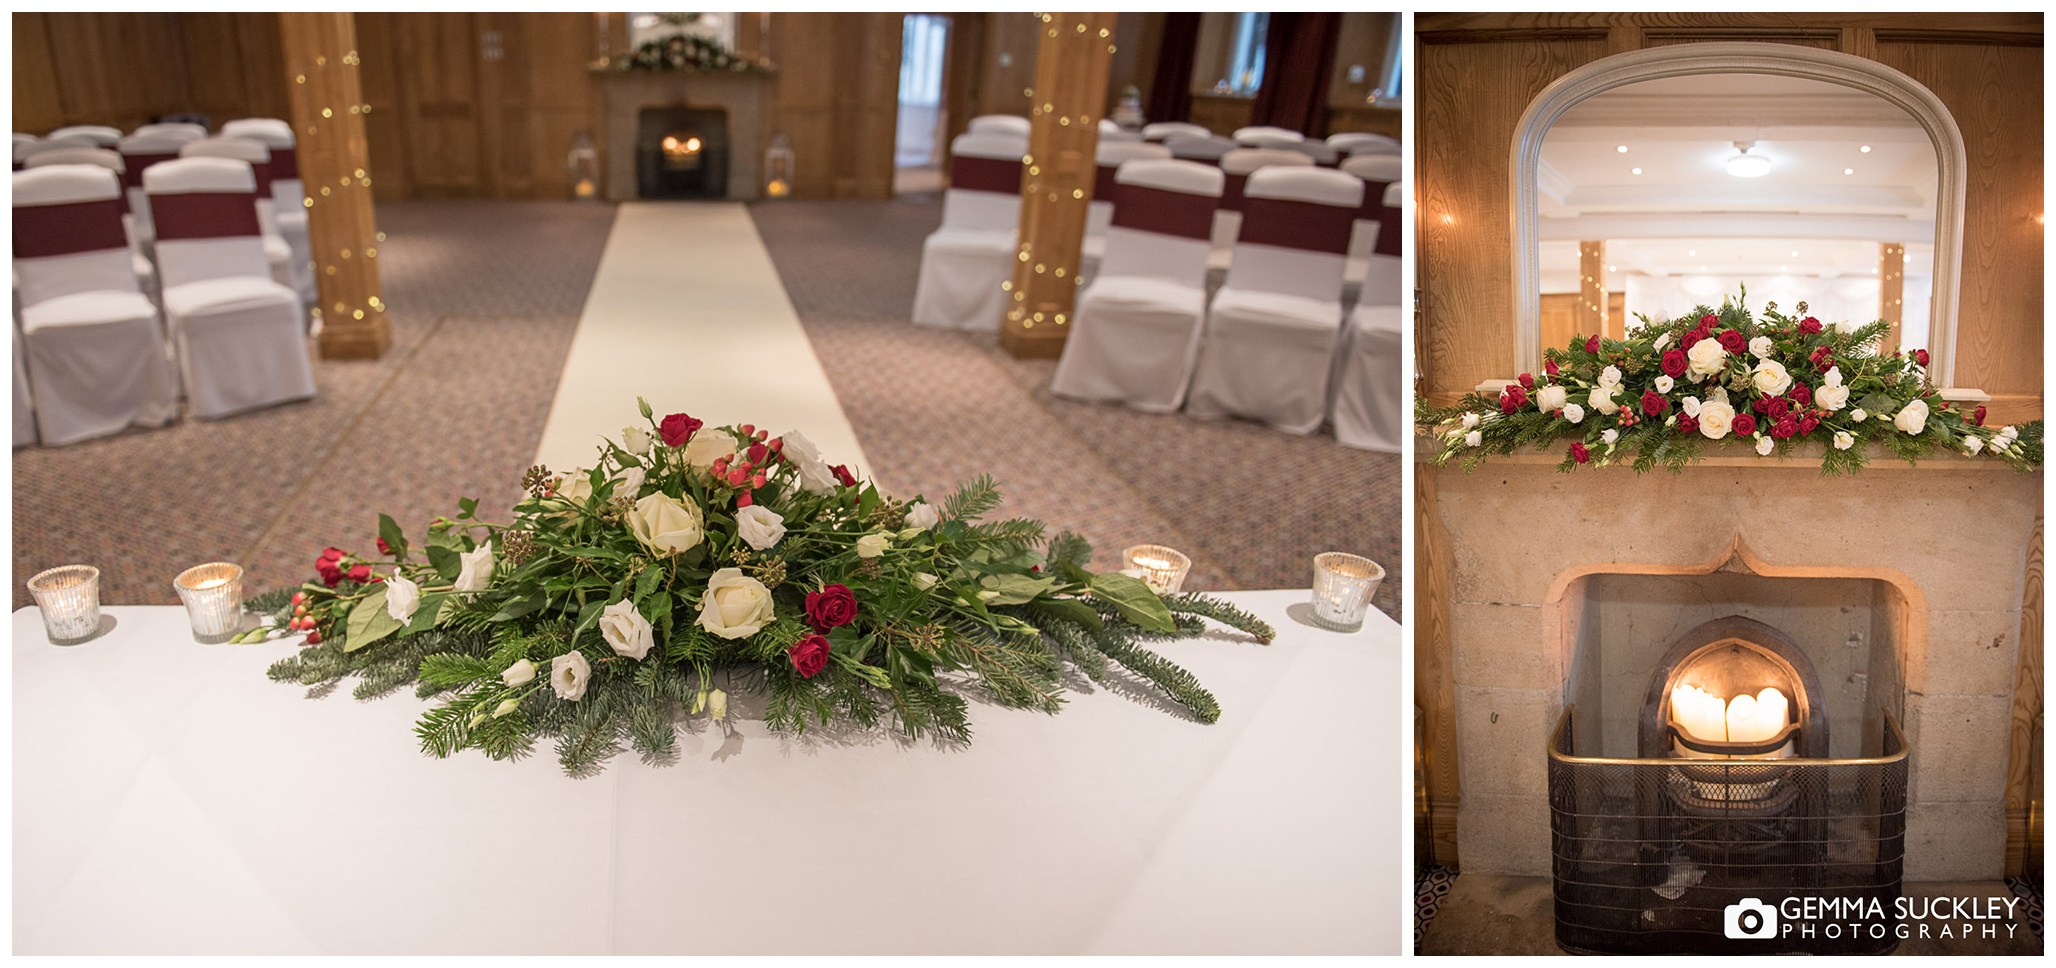 The Devonshire Arms, Bolton Abbey wedding ceremony room